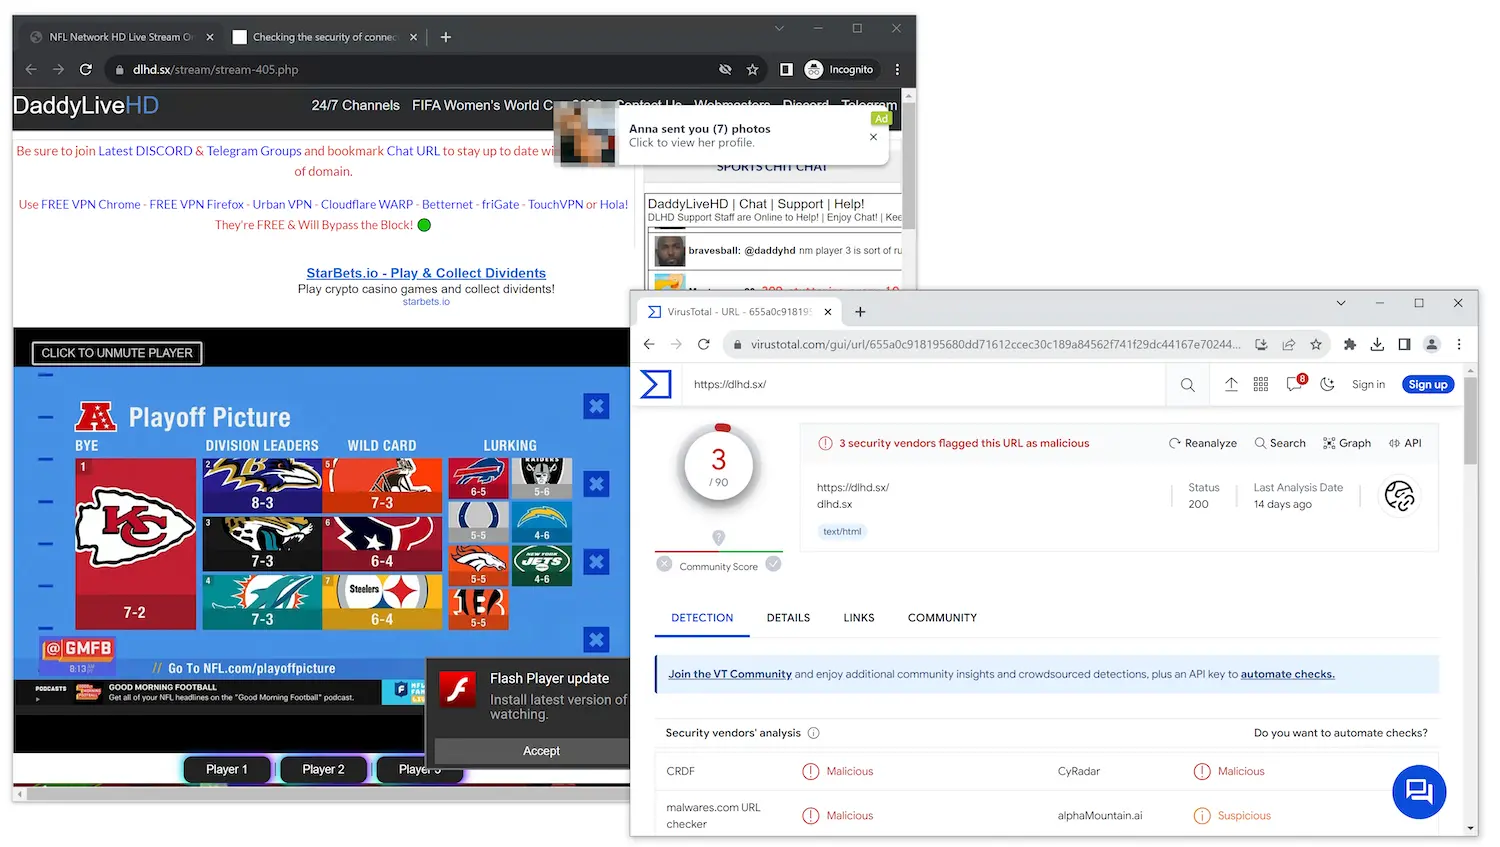 A cluttered DaddyLiveHD window, showing an NFL live stream, live chat feed, and an ad notification. The other window shows a security test finding DaddyLiveHD to be potentially malicious.